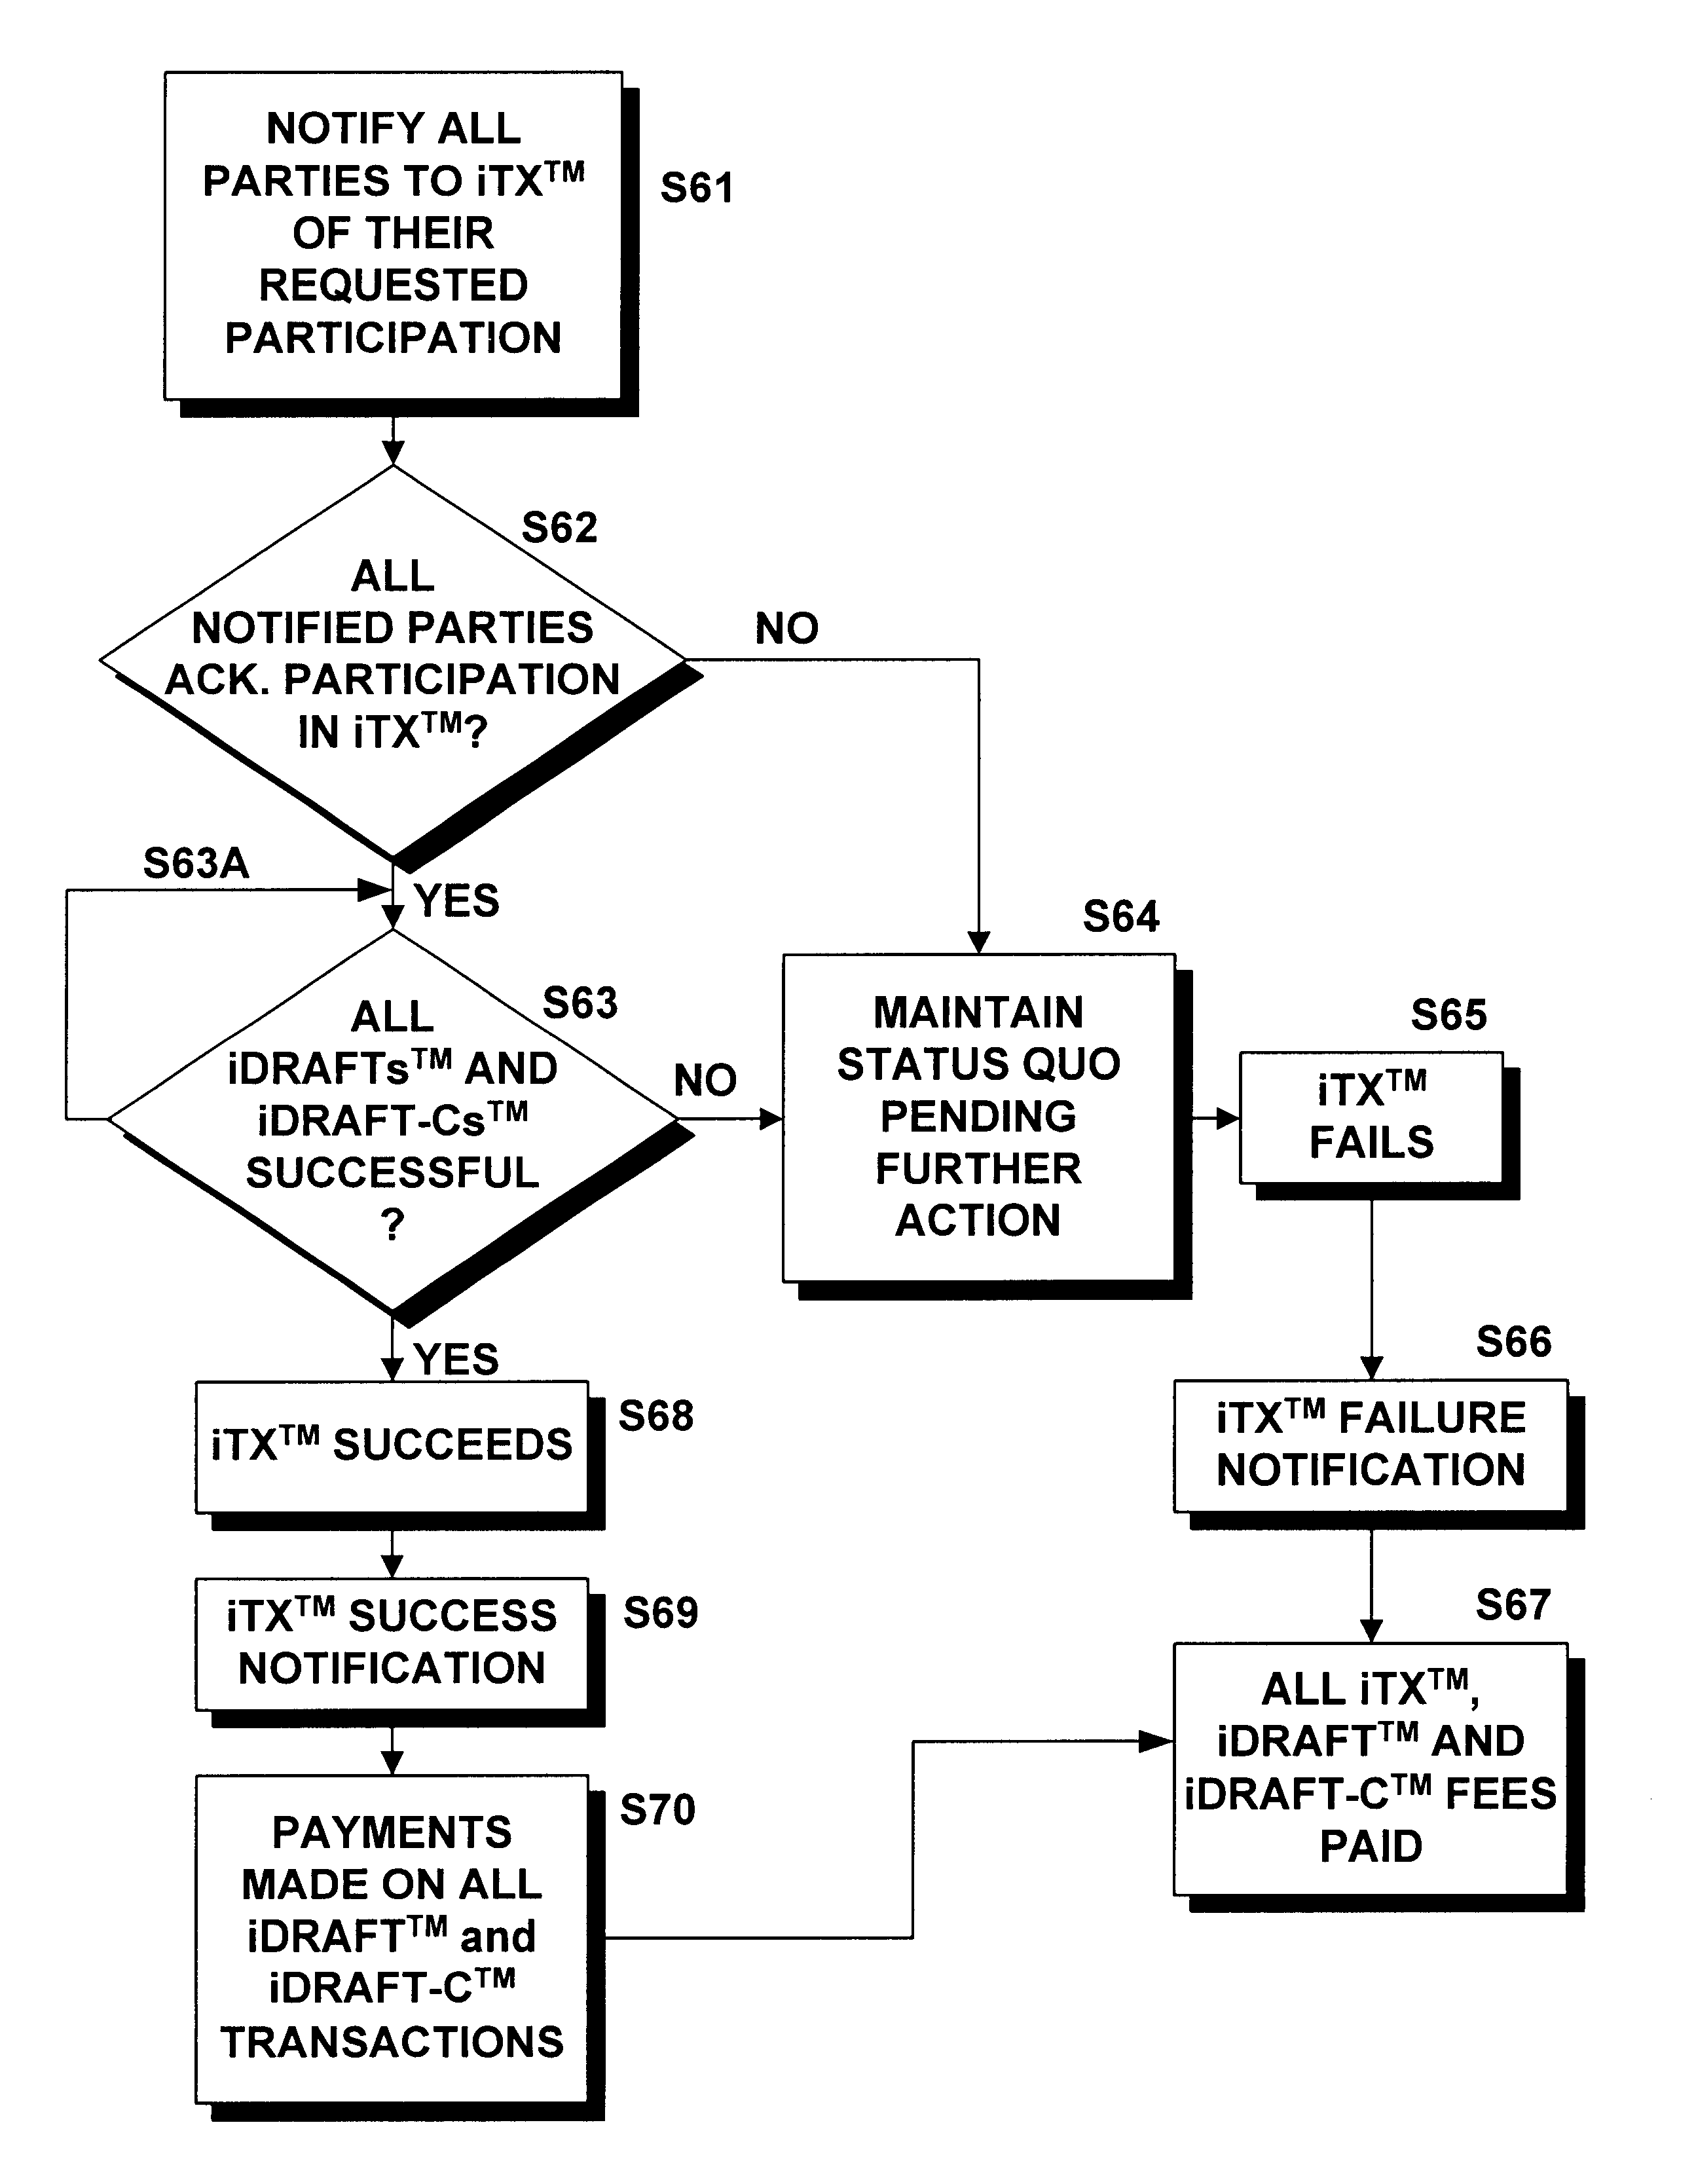 Methods and systems for carrying out directory-authenticated electronic transactions including contingency-dependent payments via secure electronic bank drafts